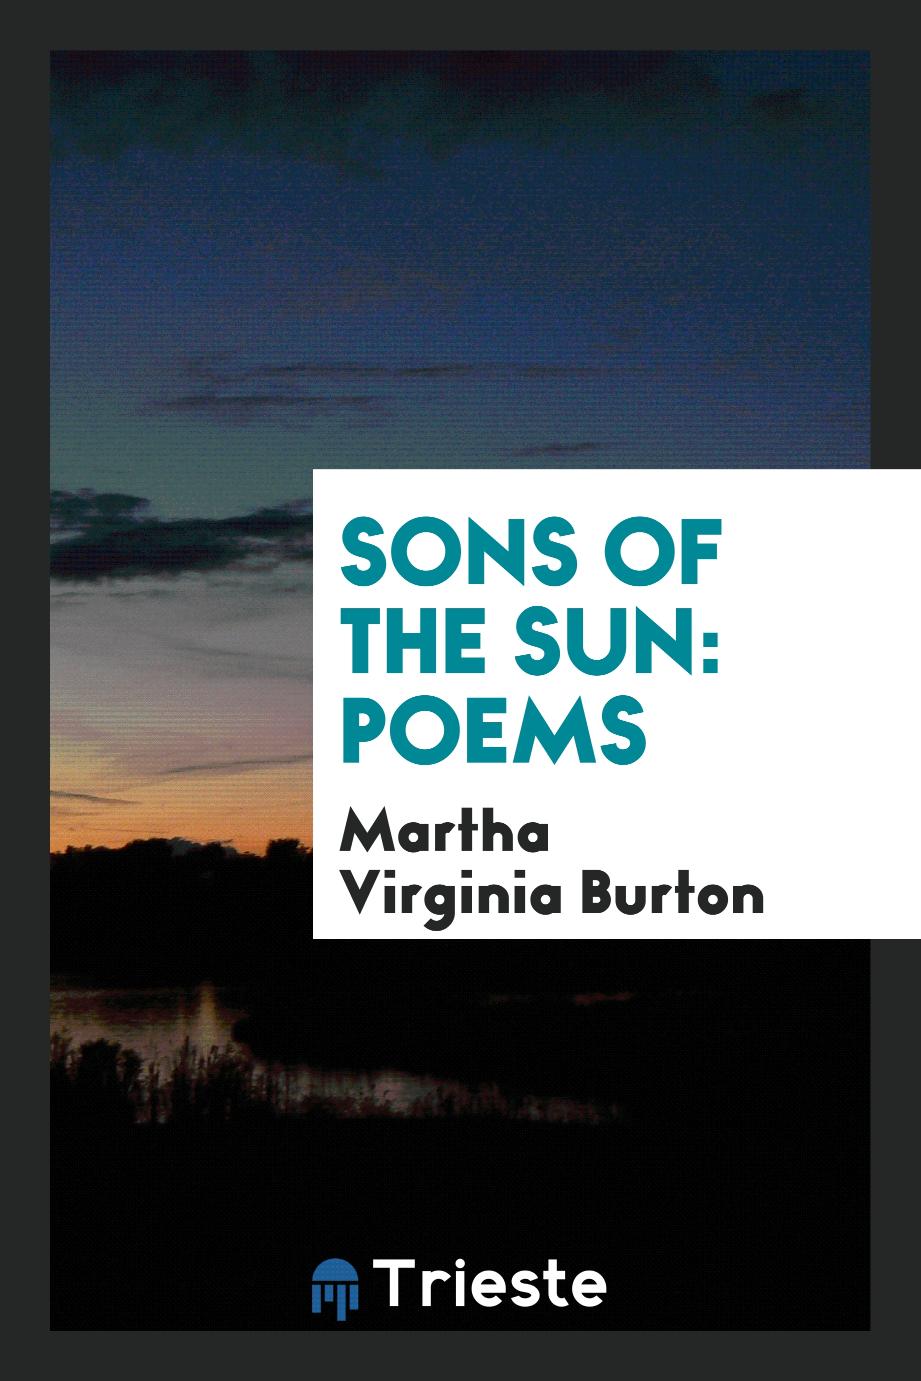 Sons of the Sun: Poems